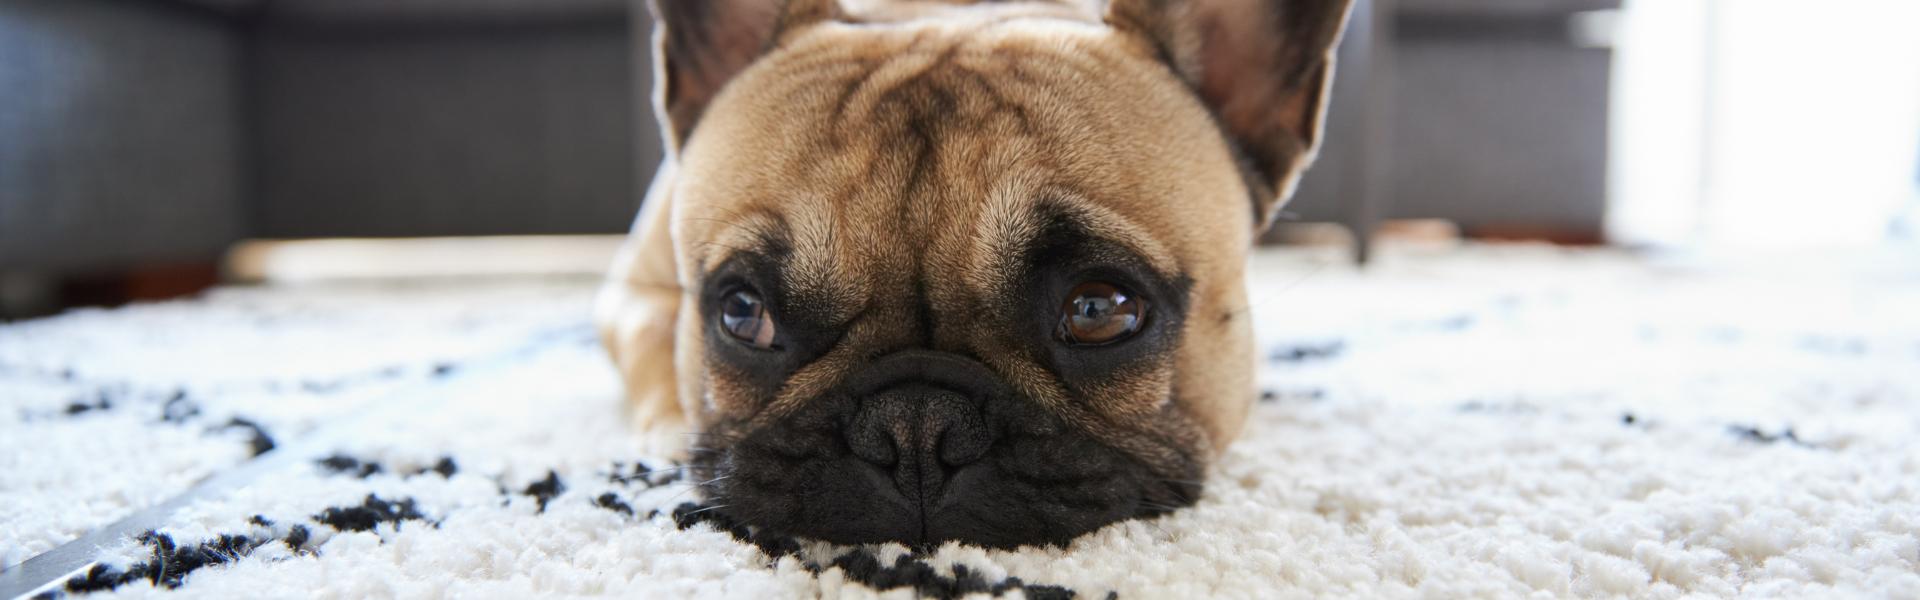 Signs your dog is experiencing stress (and how to prevent it)